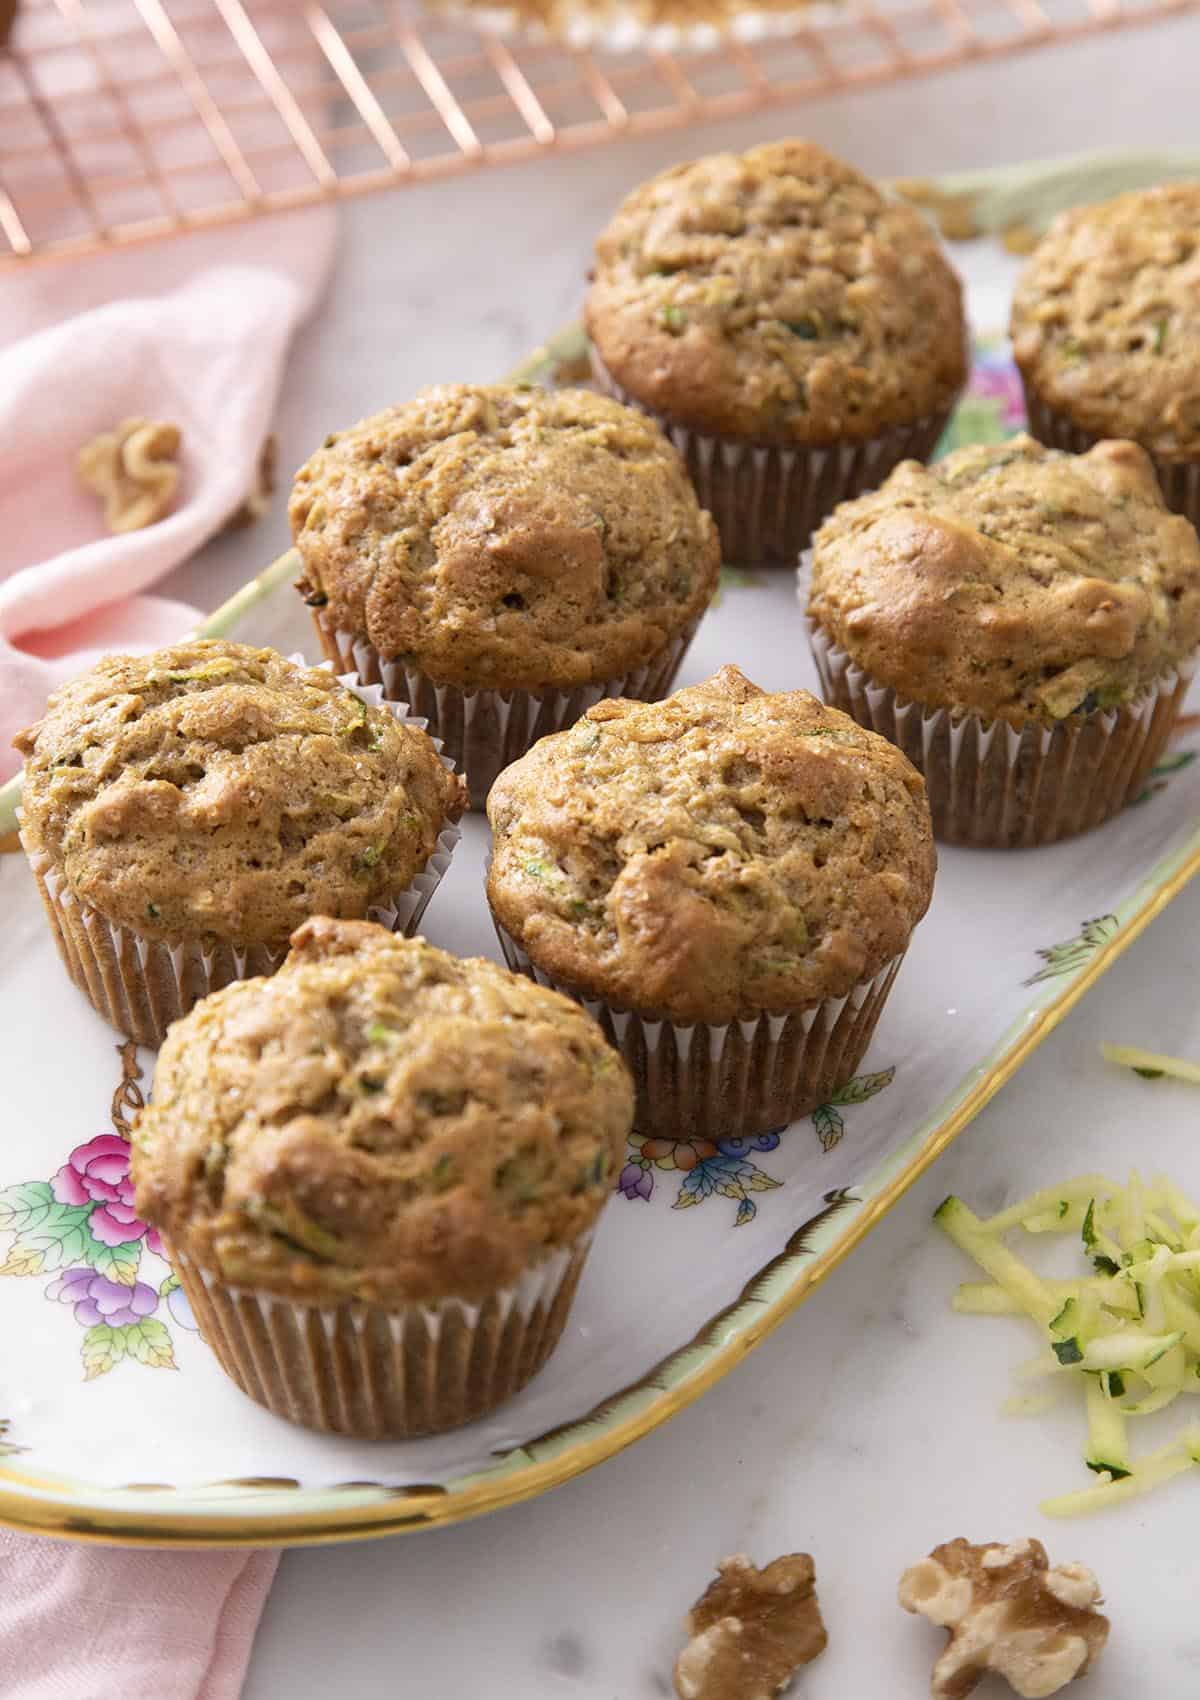 Zucchini muffins with toasted walnuts on a serving tray.